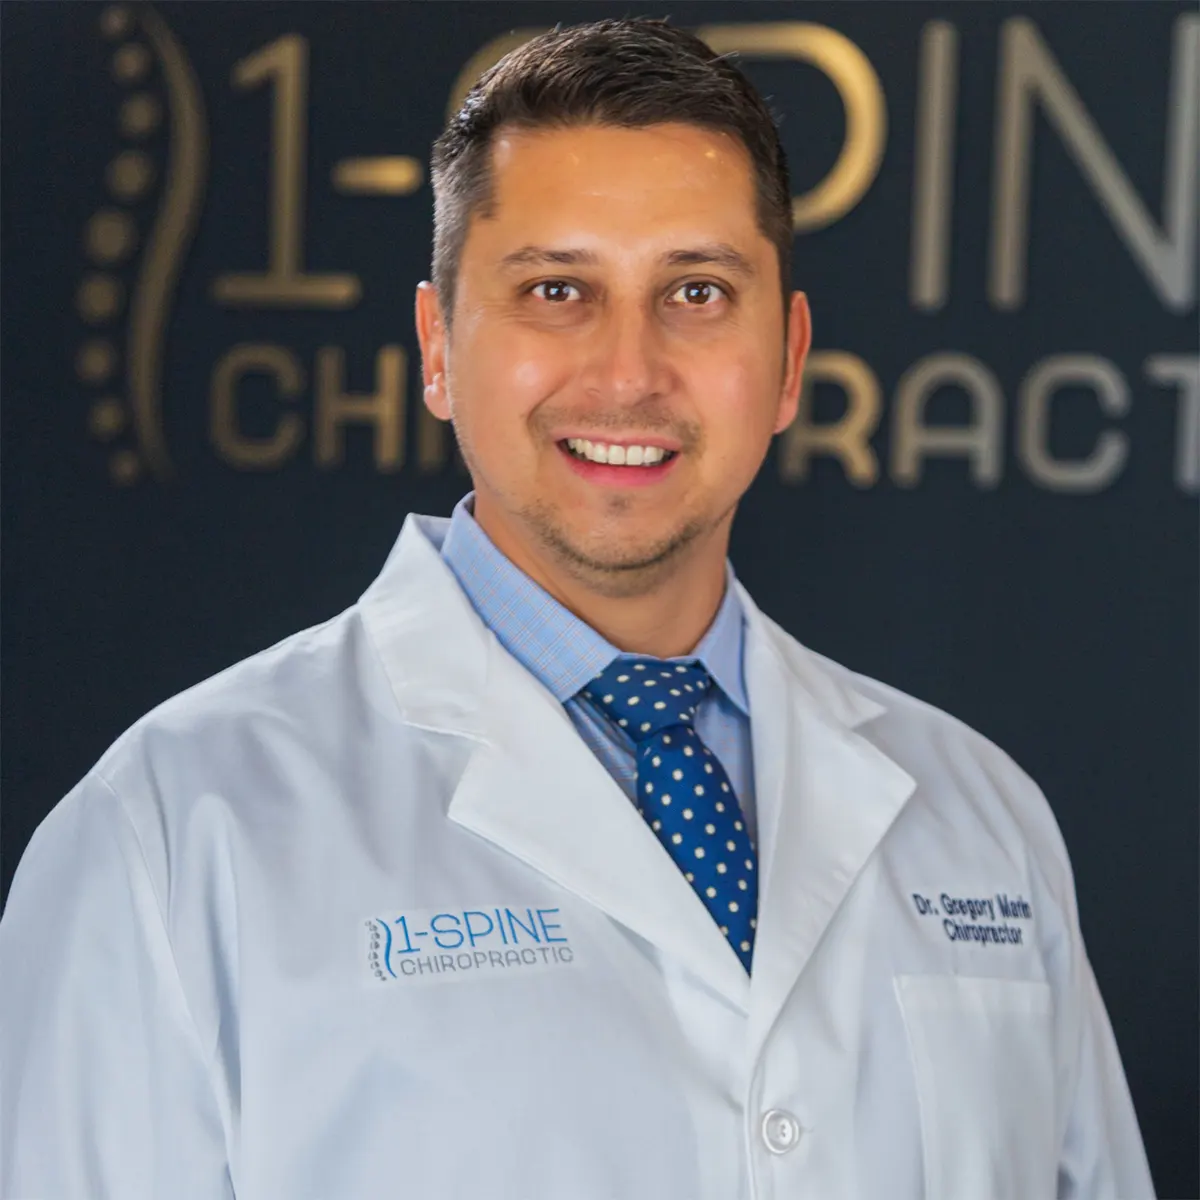 Dr. Gregory Marin of 1-Spine Chiropractic clinic in Lubbock and Levelland TX